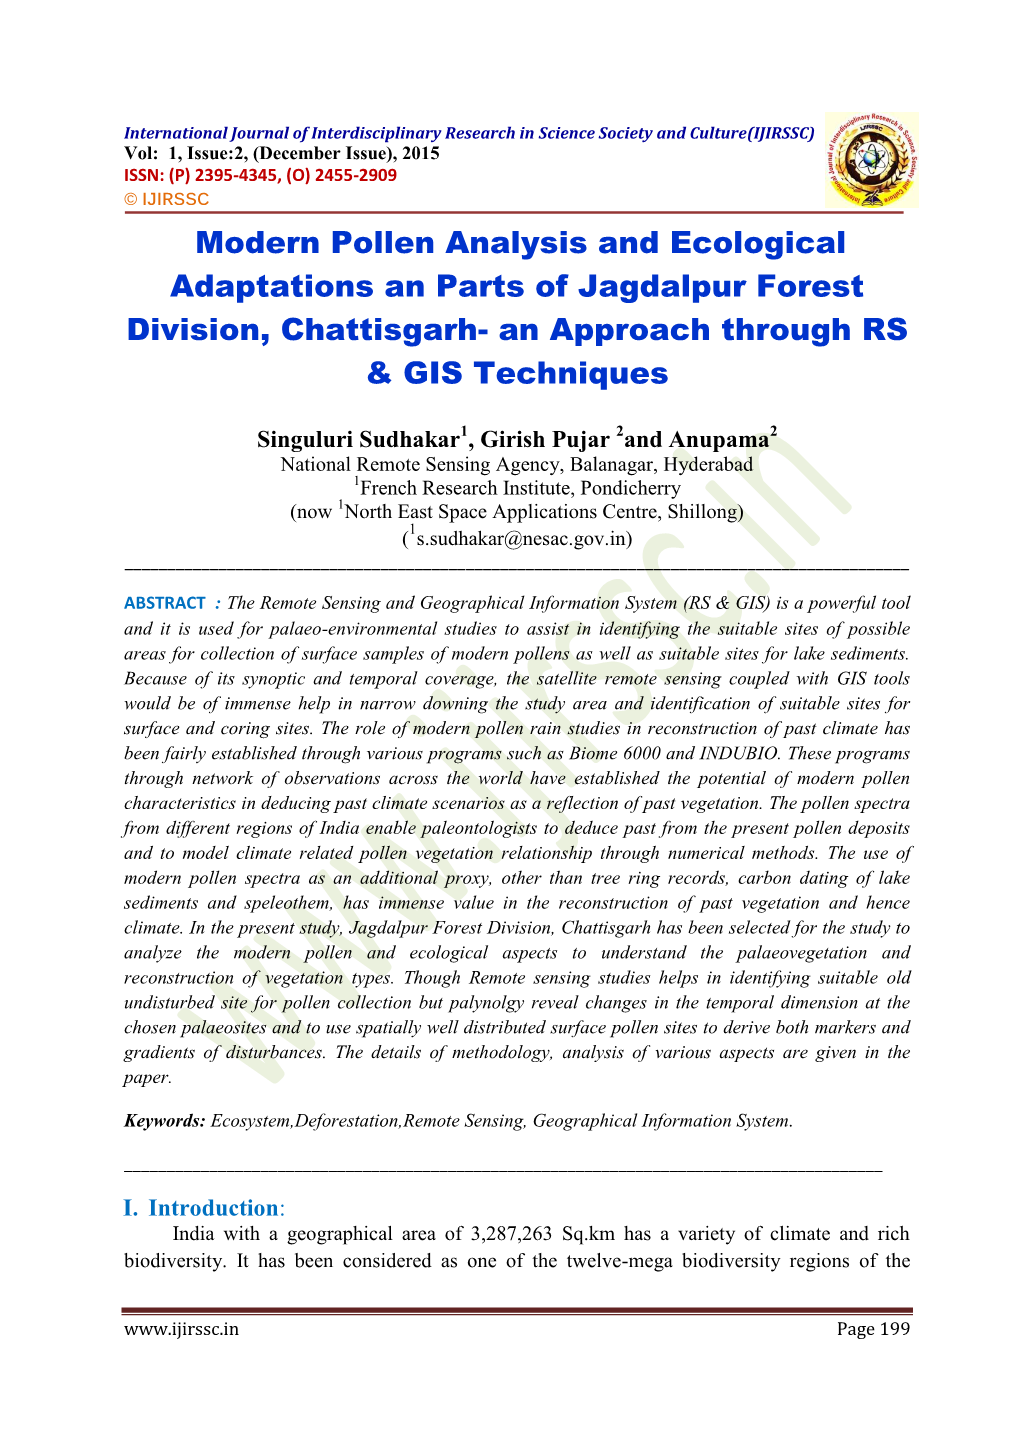 Modern Pollen Analysis and Ecological Adaptations an Parts of Jagdalpur Forest Division, Chattisgarh- an Approach Through RS & GIS Techniques